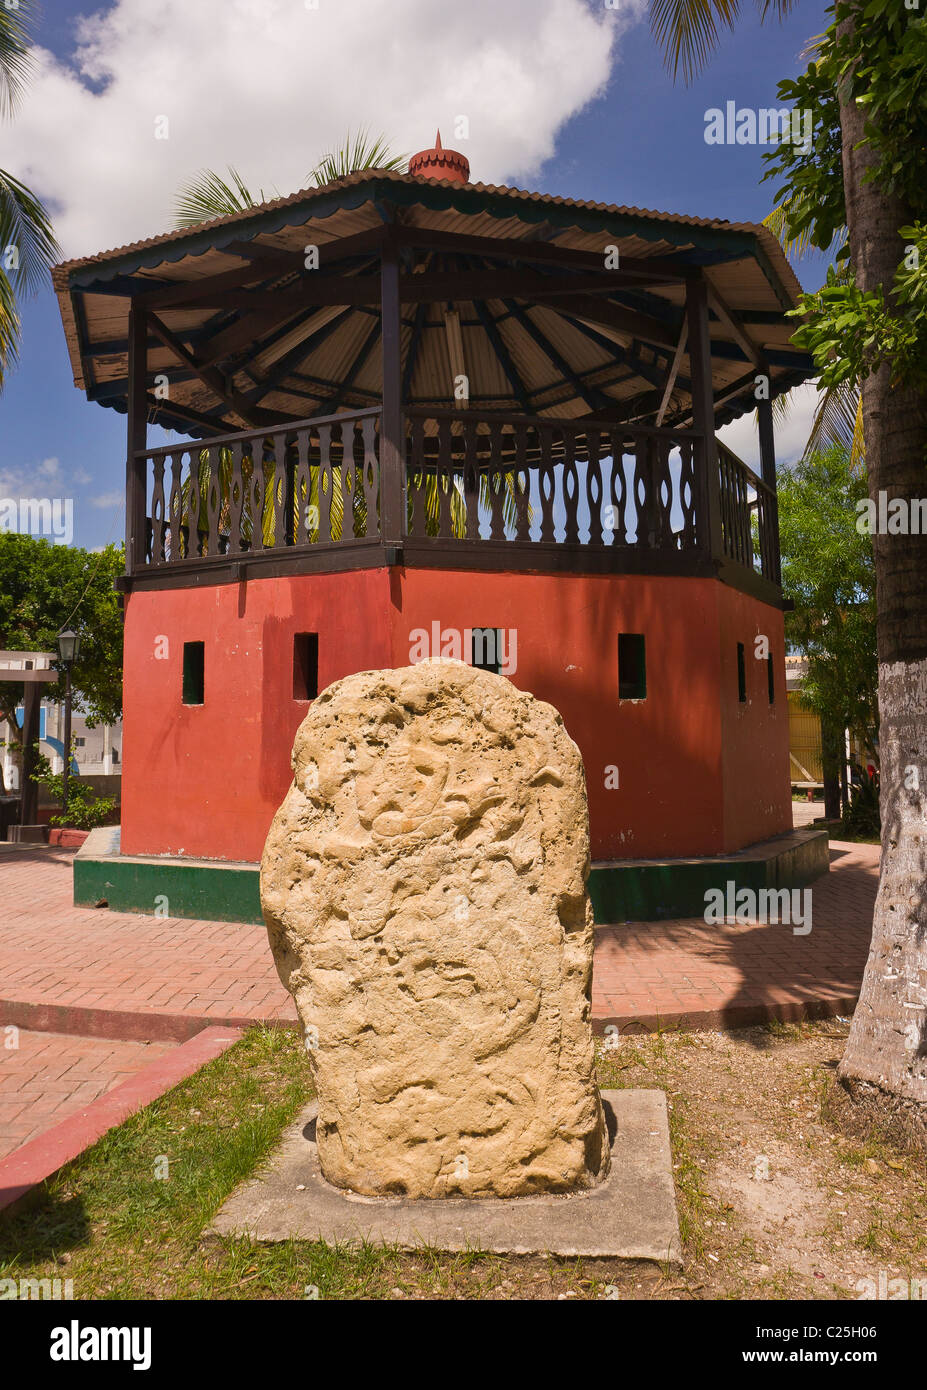 FLORES, GUATEMALA - Statue and gazebo, in colonial town of Flores. Stock Photo